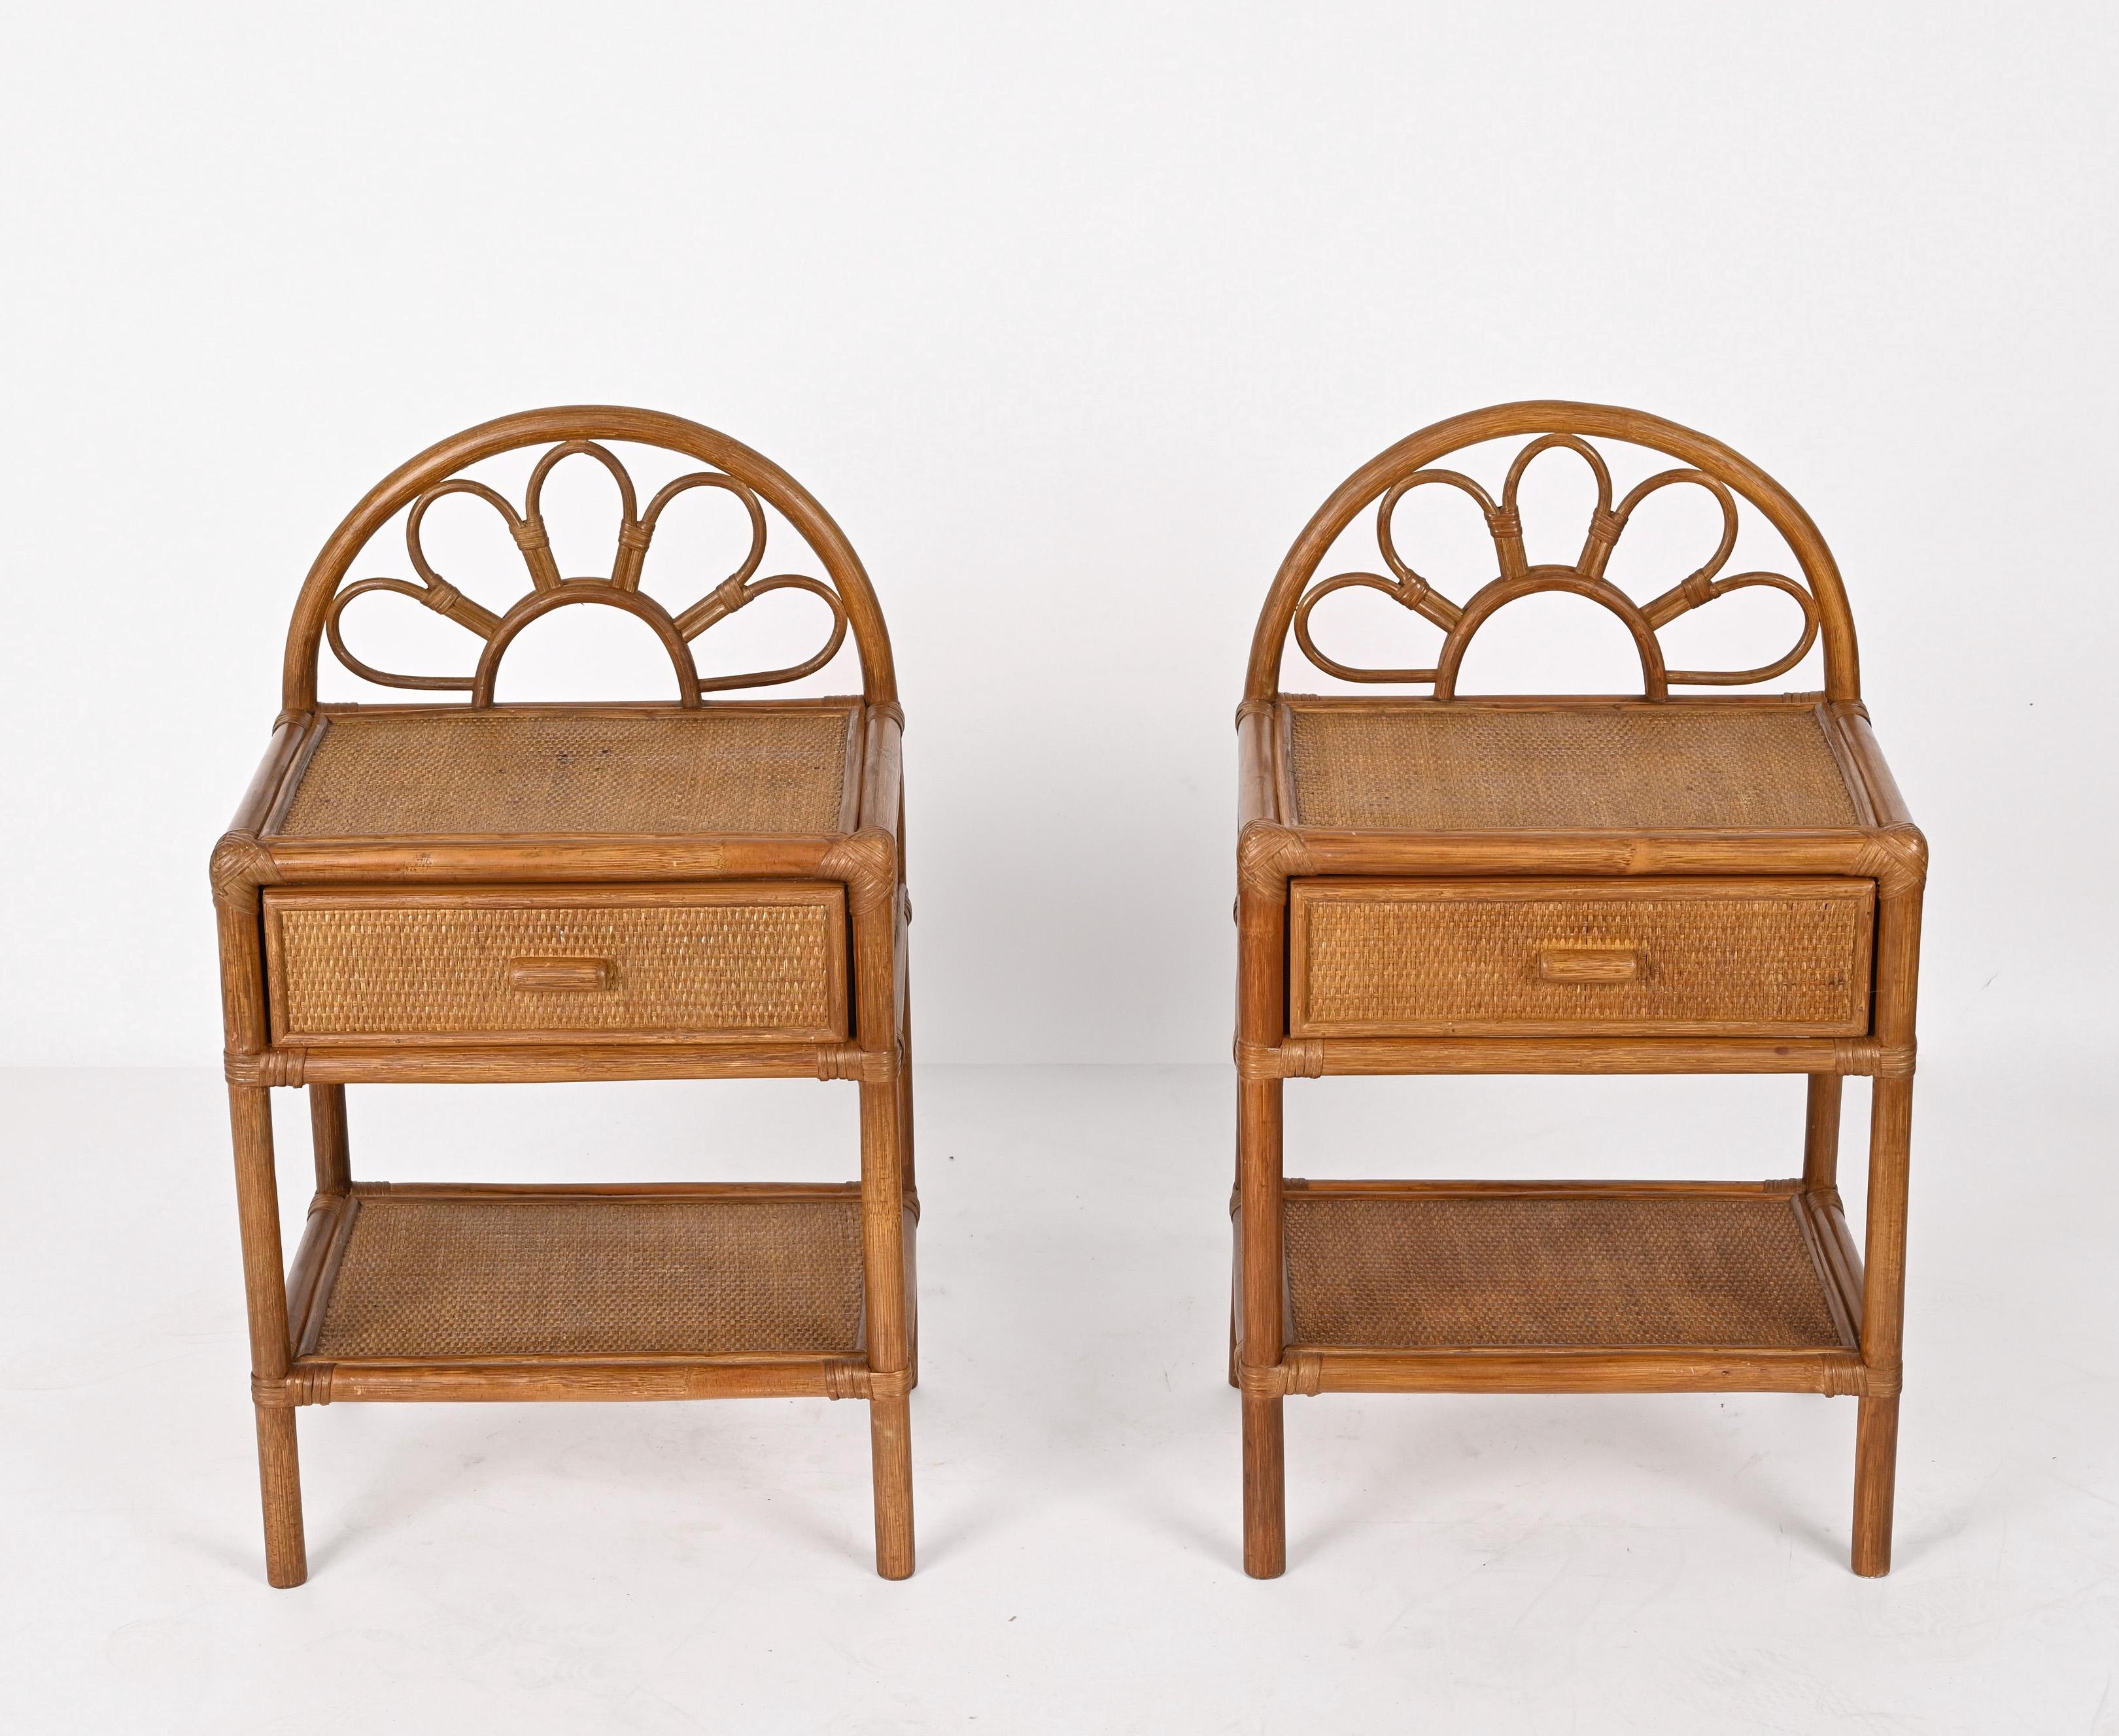 Incredible pair of Mid-Century Modern bamboo and rattan bedside tables. These fantastic pieces were designed in Italy during the 1970s.

The key features of this wonderful set are the beautiful rationalist straight lines, improved by using natural